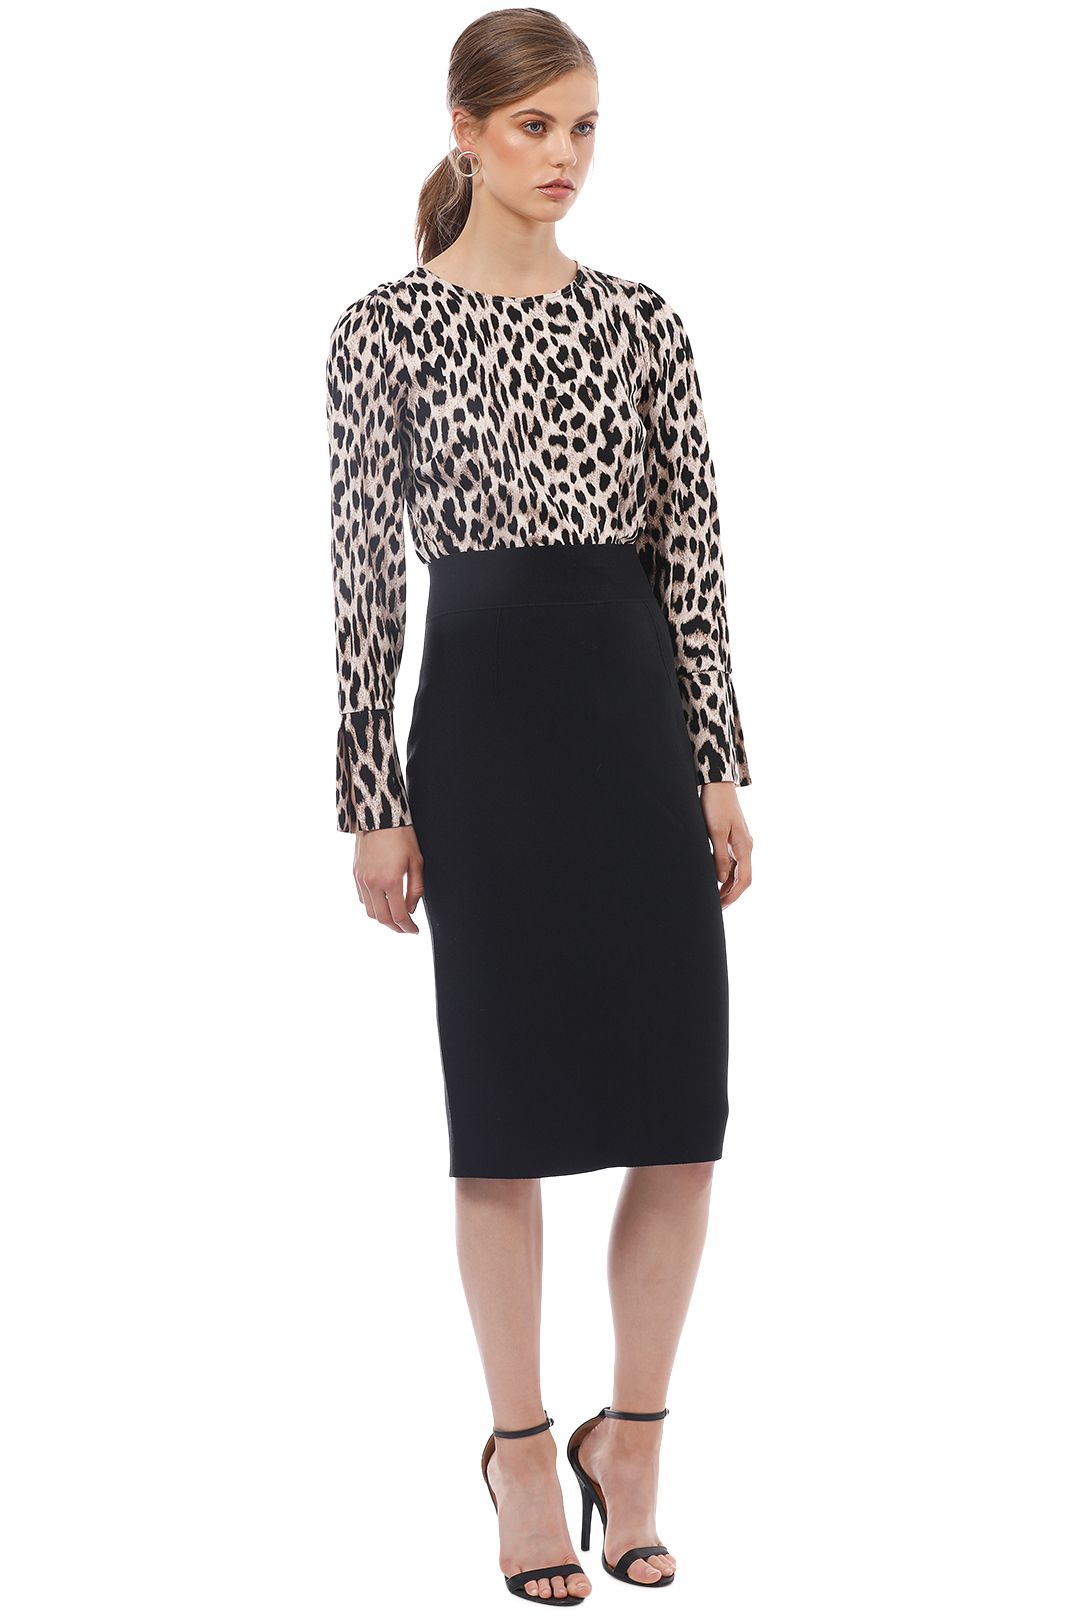 Witchery - Sleeve Detail Top - Leopard Print - Side